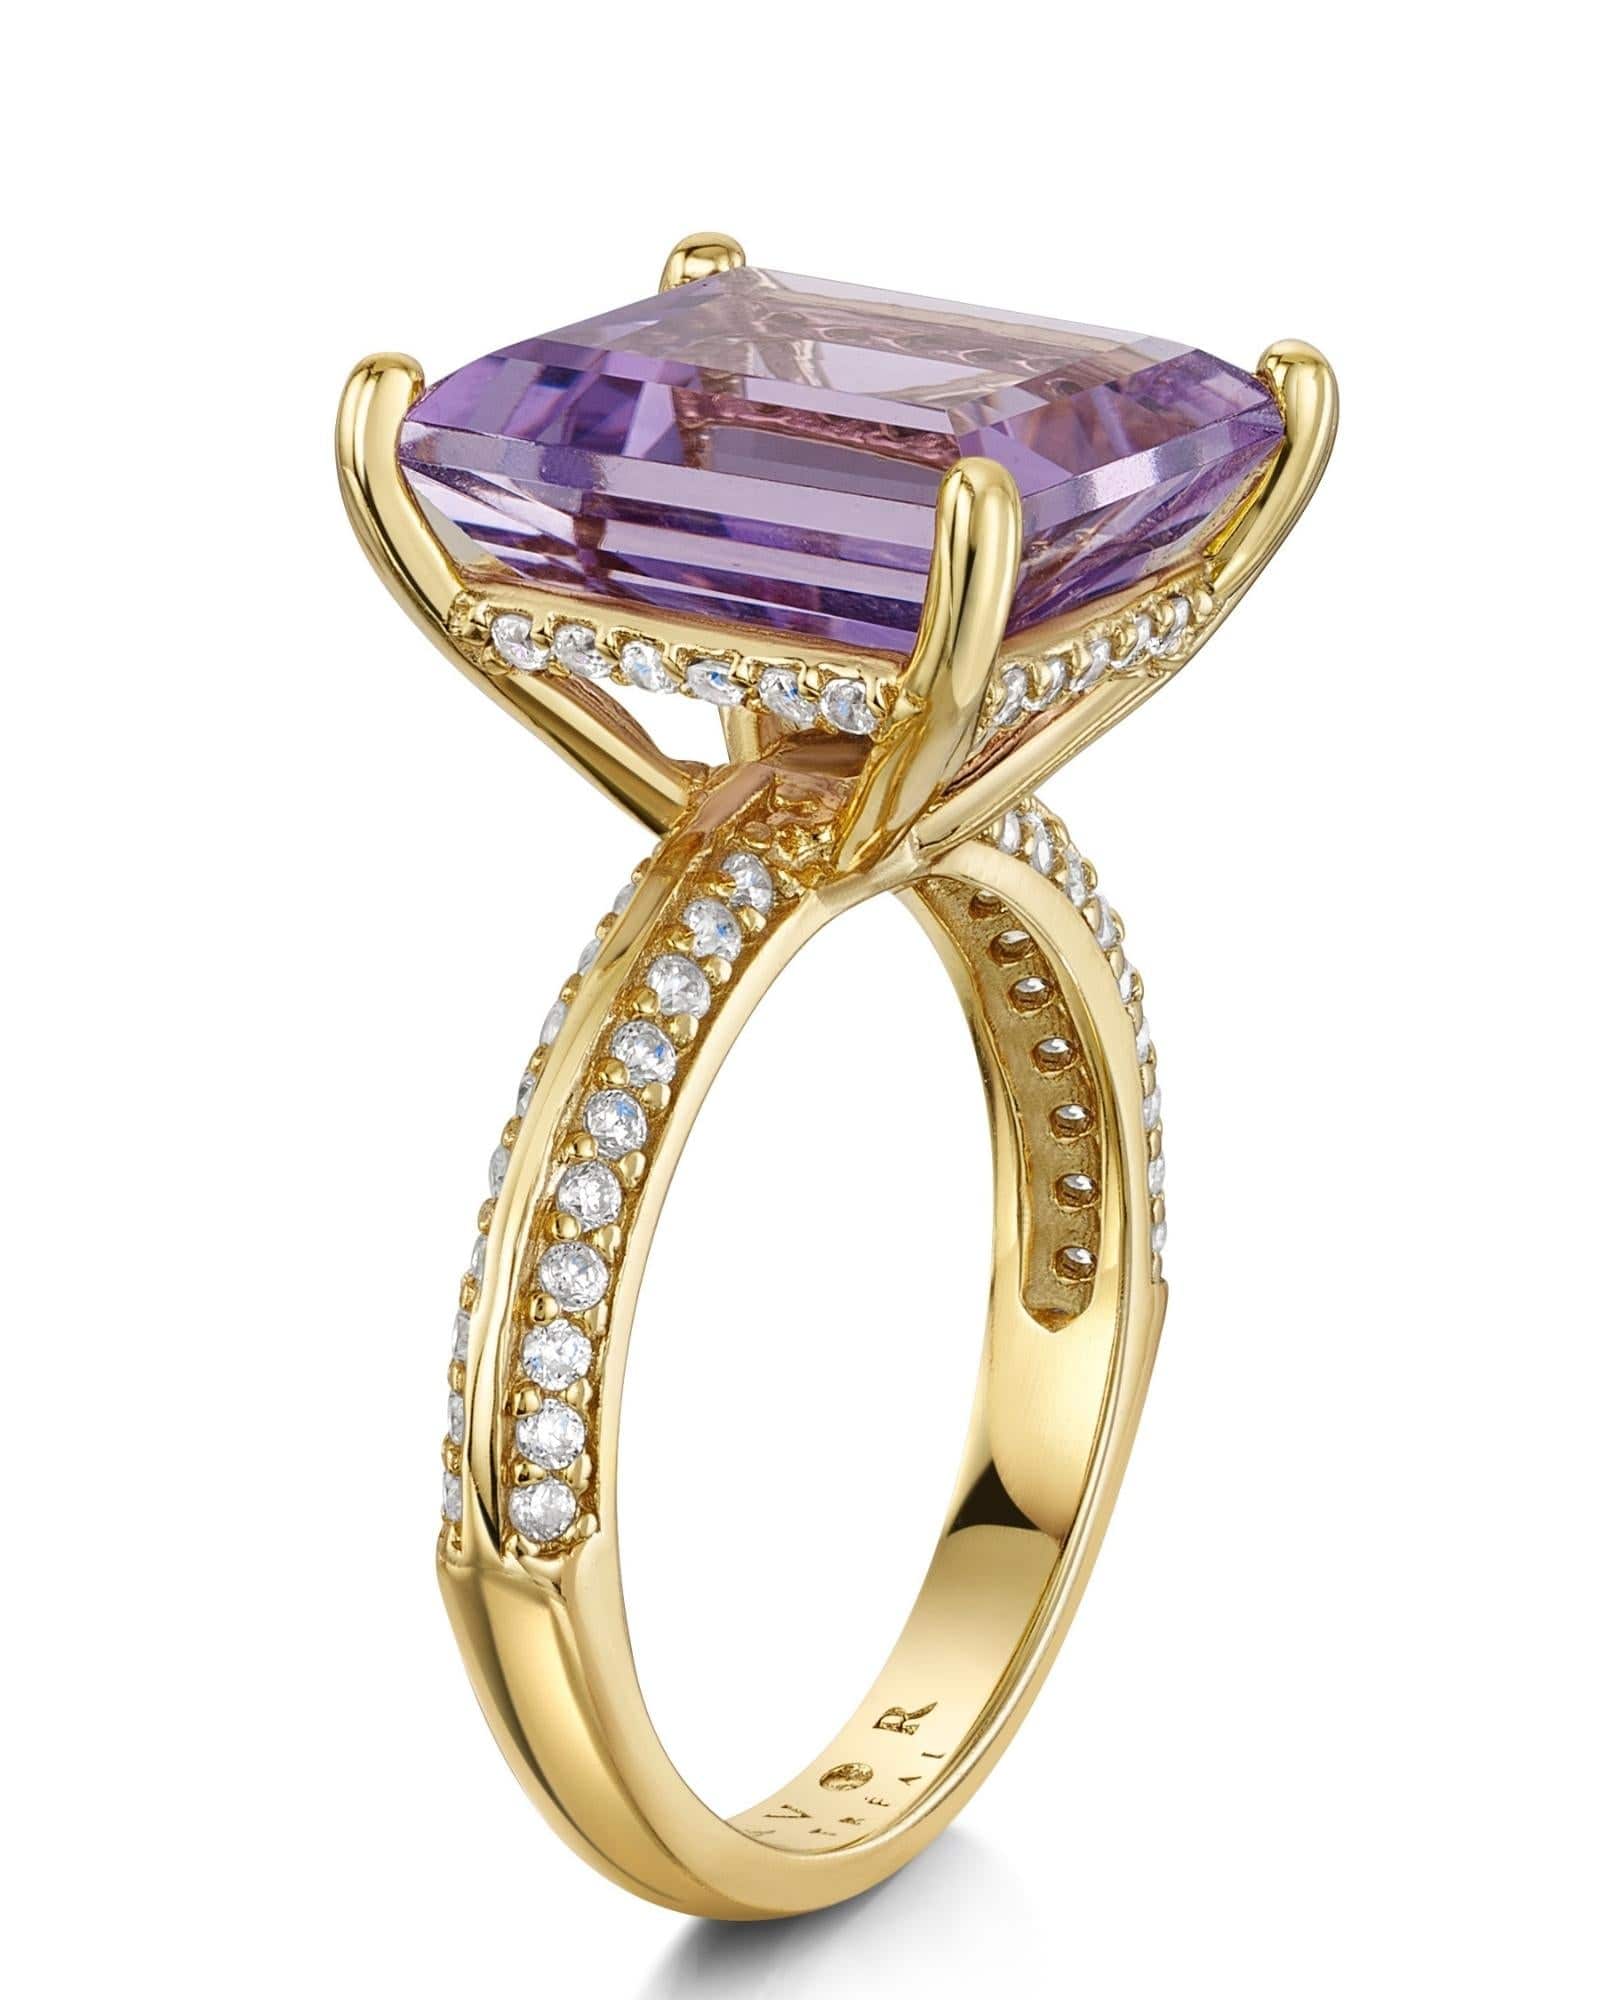 Fervor Montreal Rings Pink Amethyst Emerald Cut Cocktail Ring